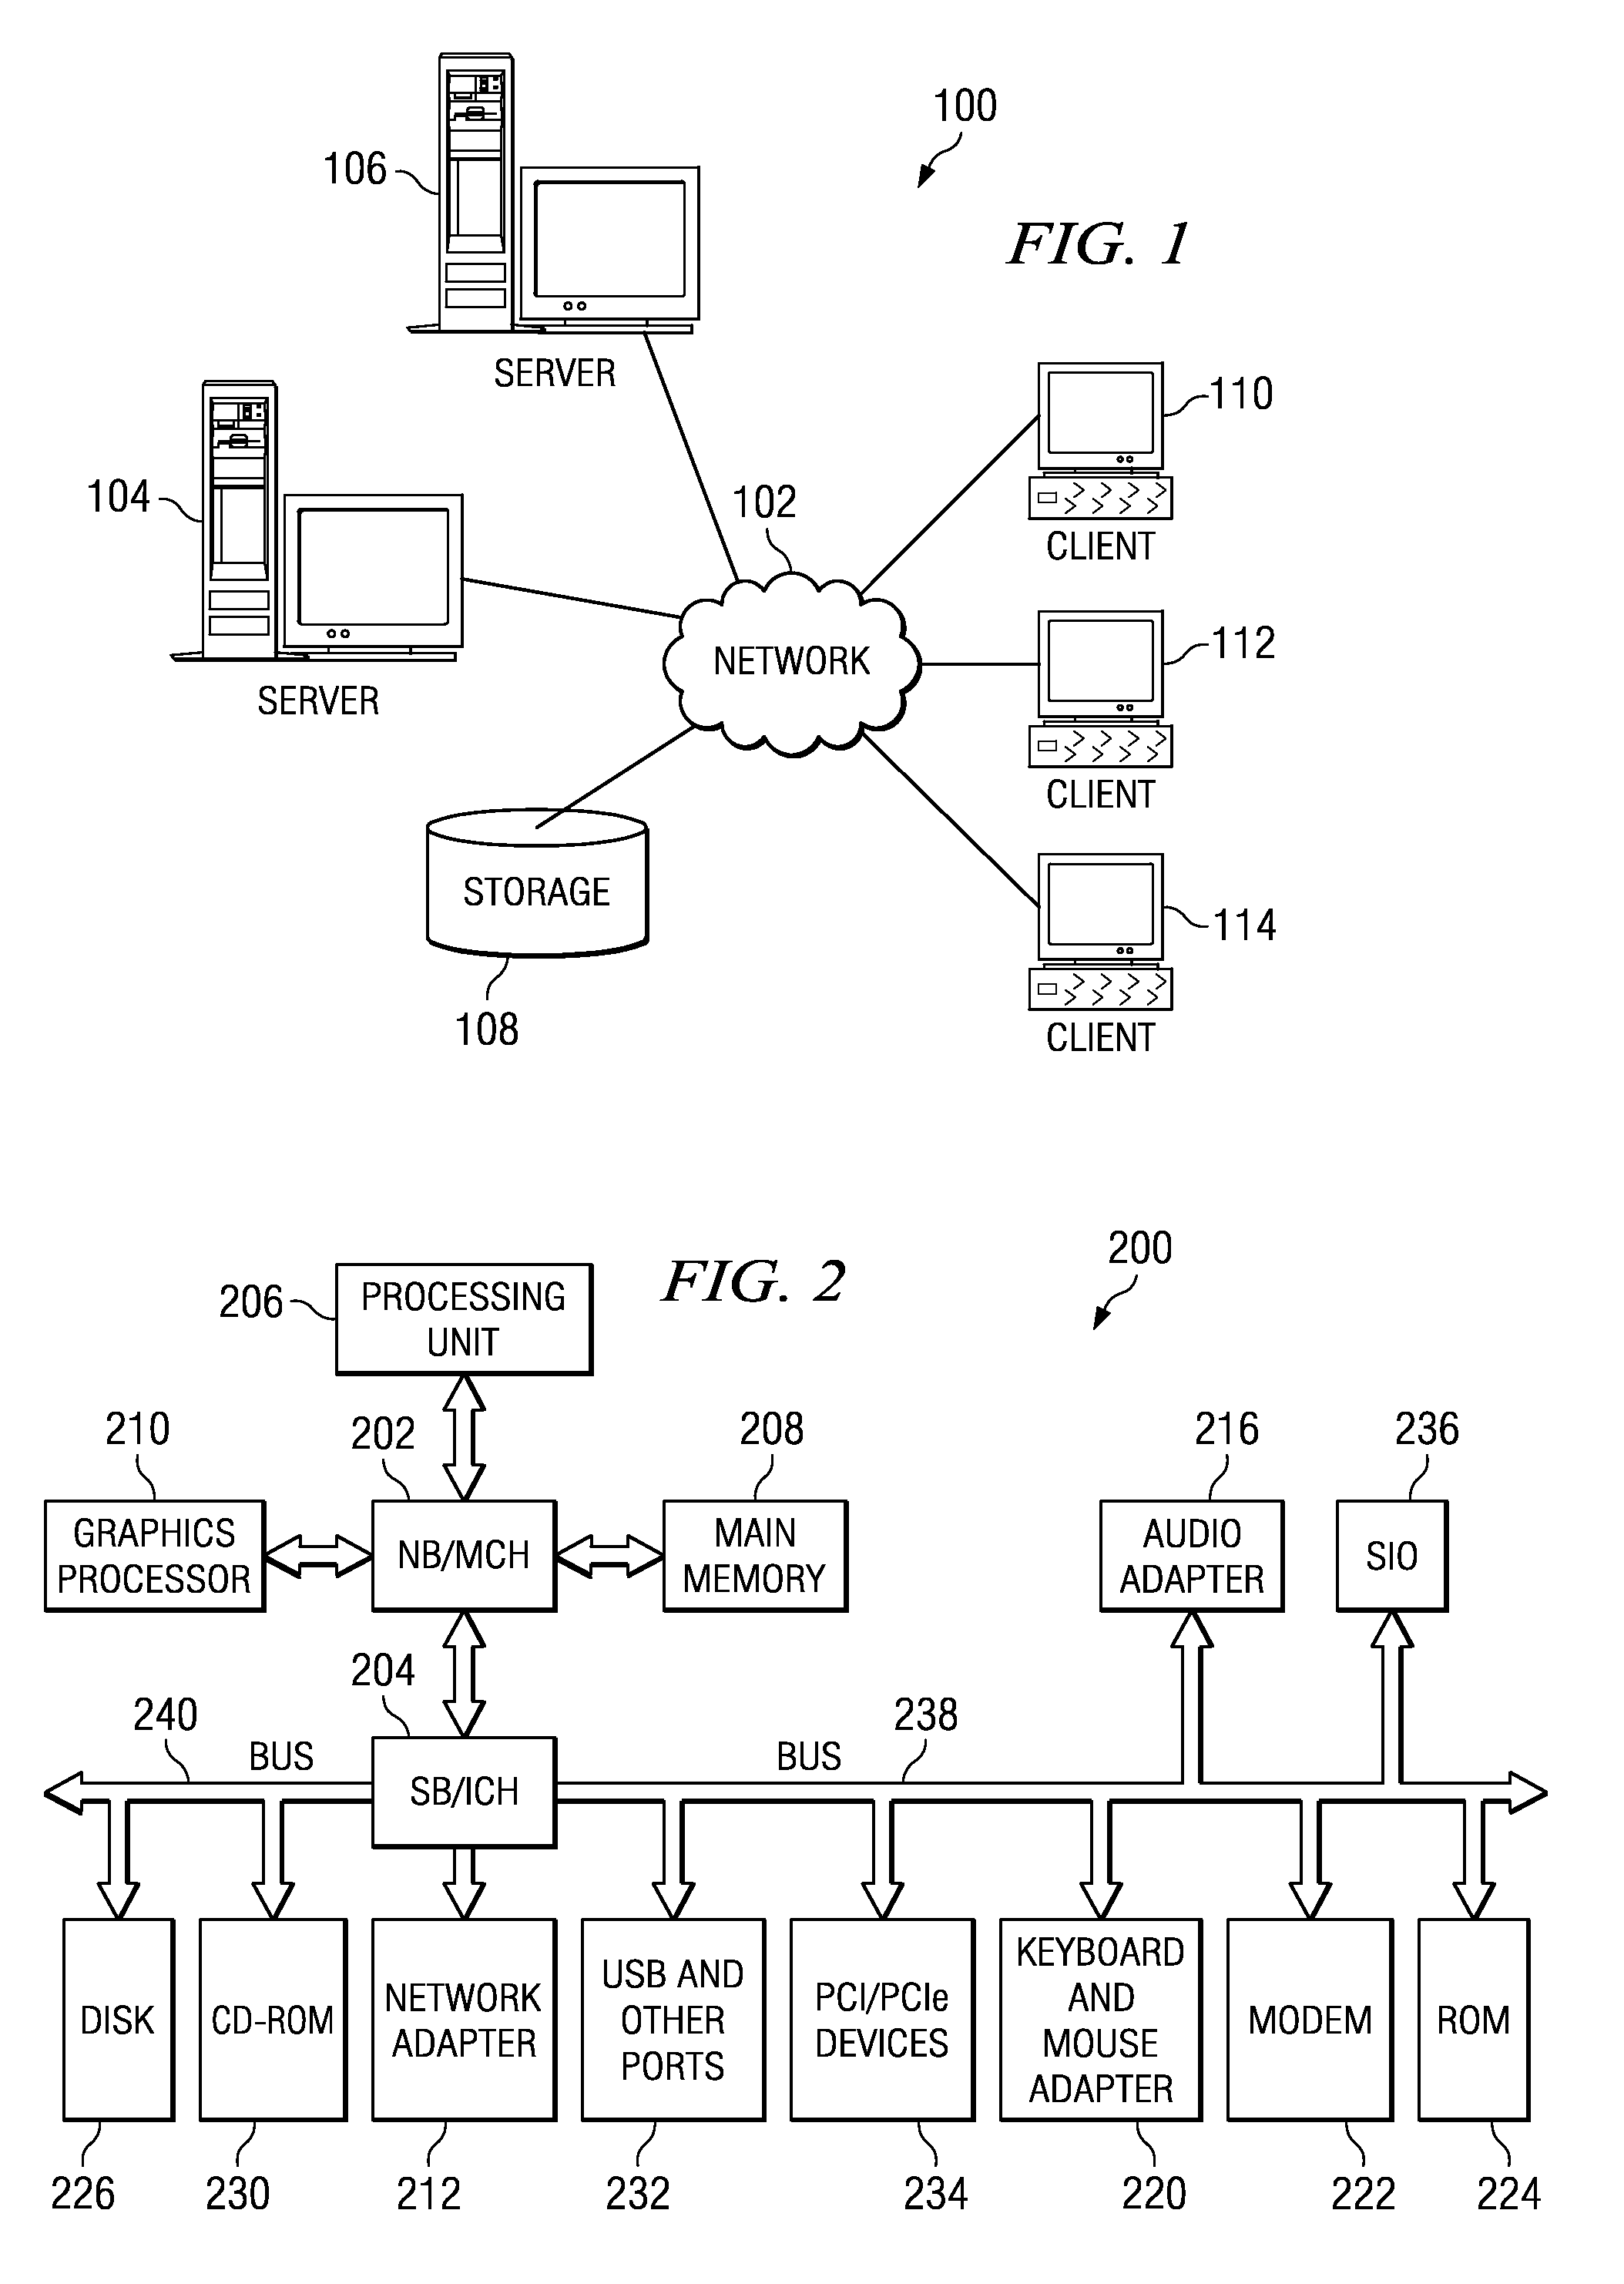 System and method for dynamically updating web pages using messaging-oriented middleware